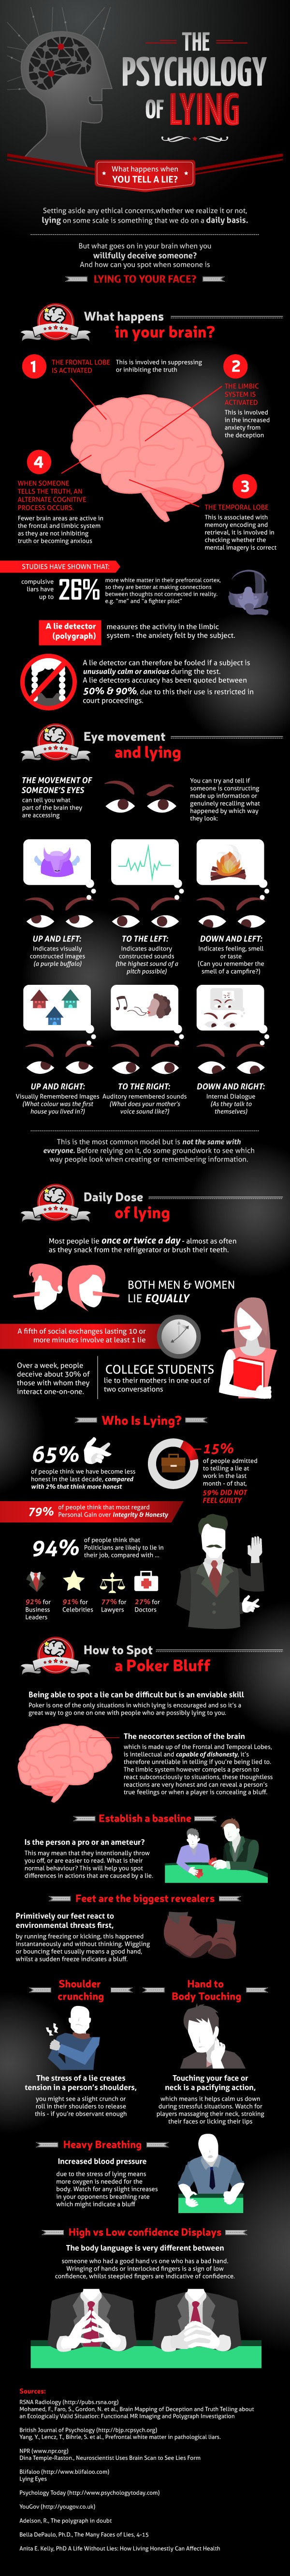 The-Psychology-of-Lying